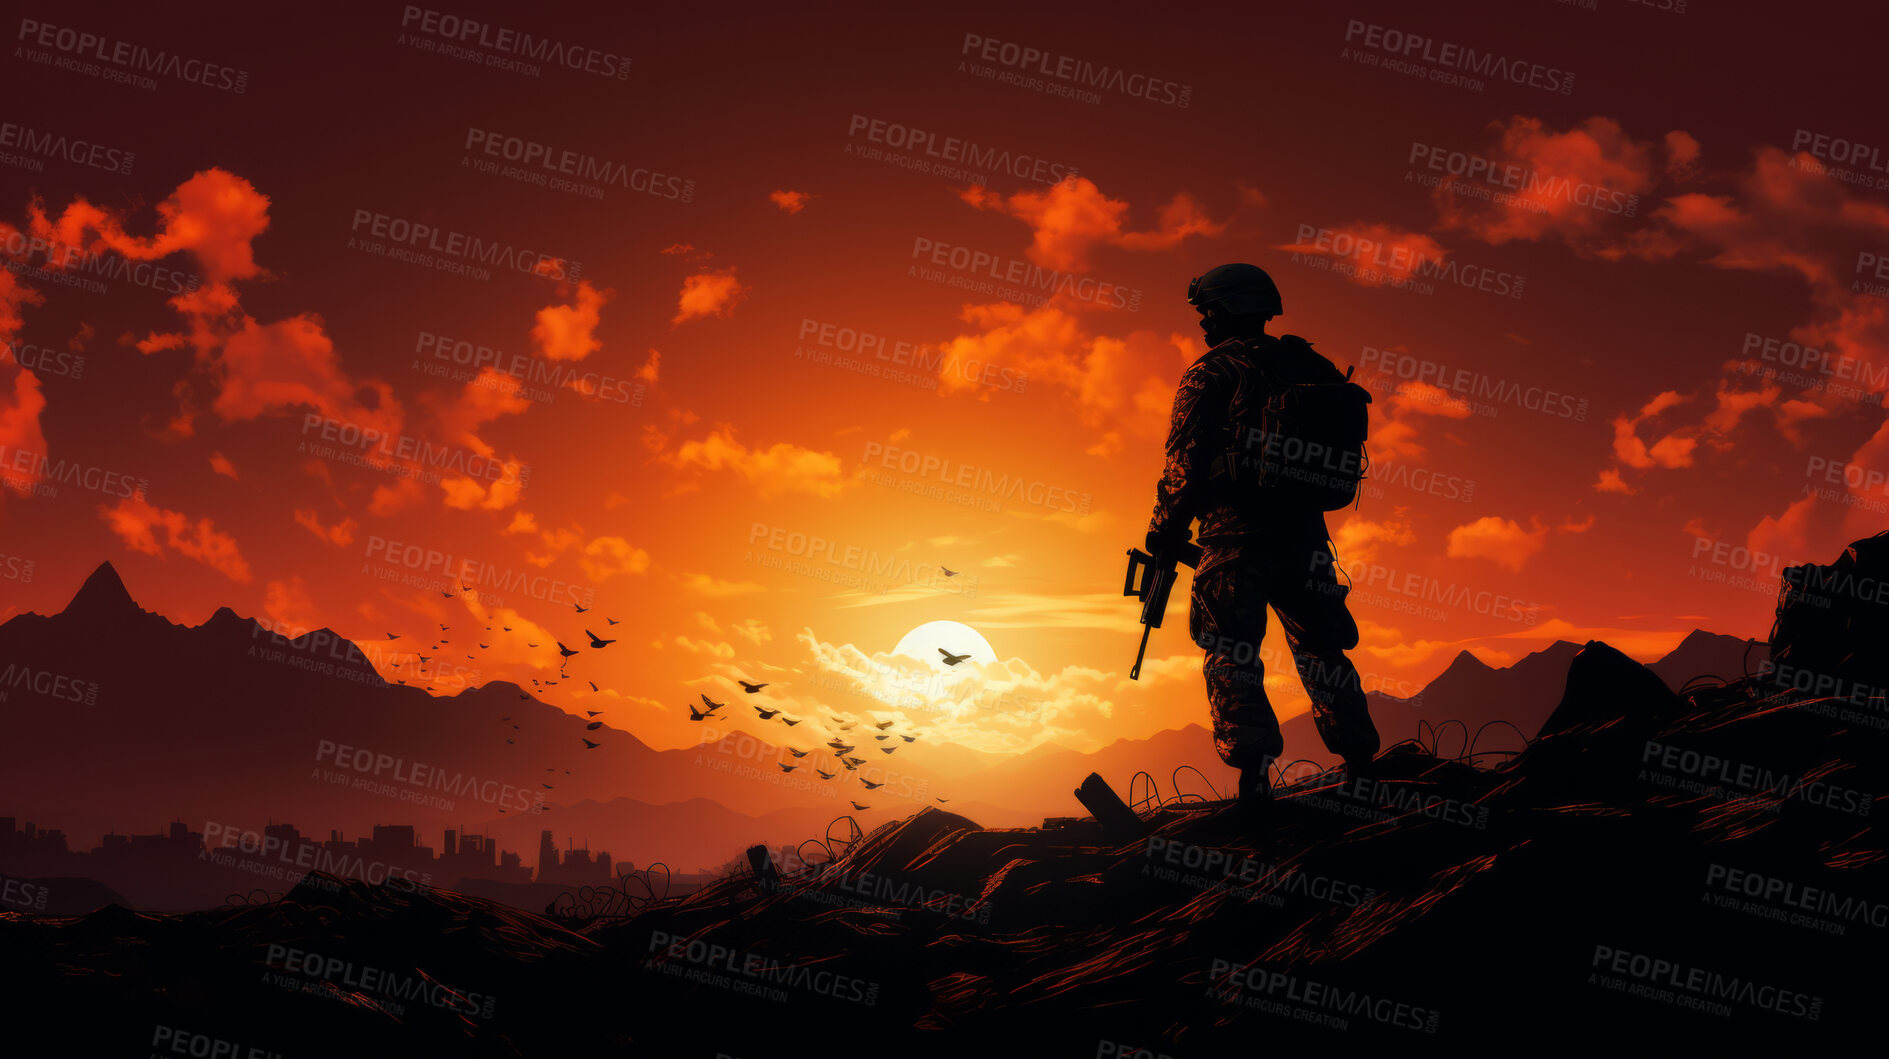 Buy stock photo Graphic silhouette of armed soldier or marine at sunset.
War concept.